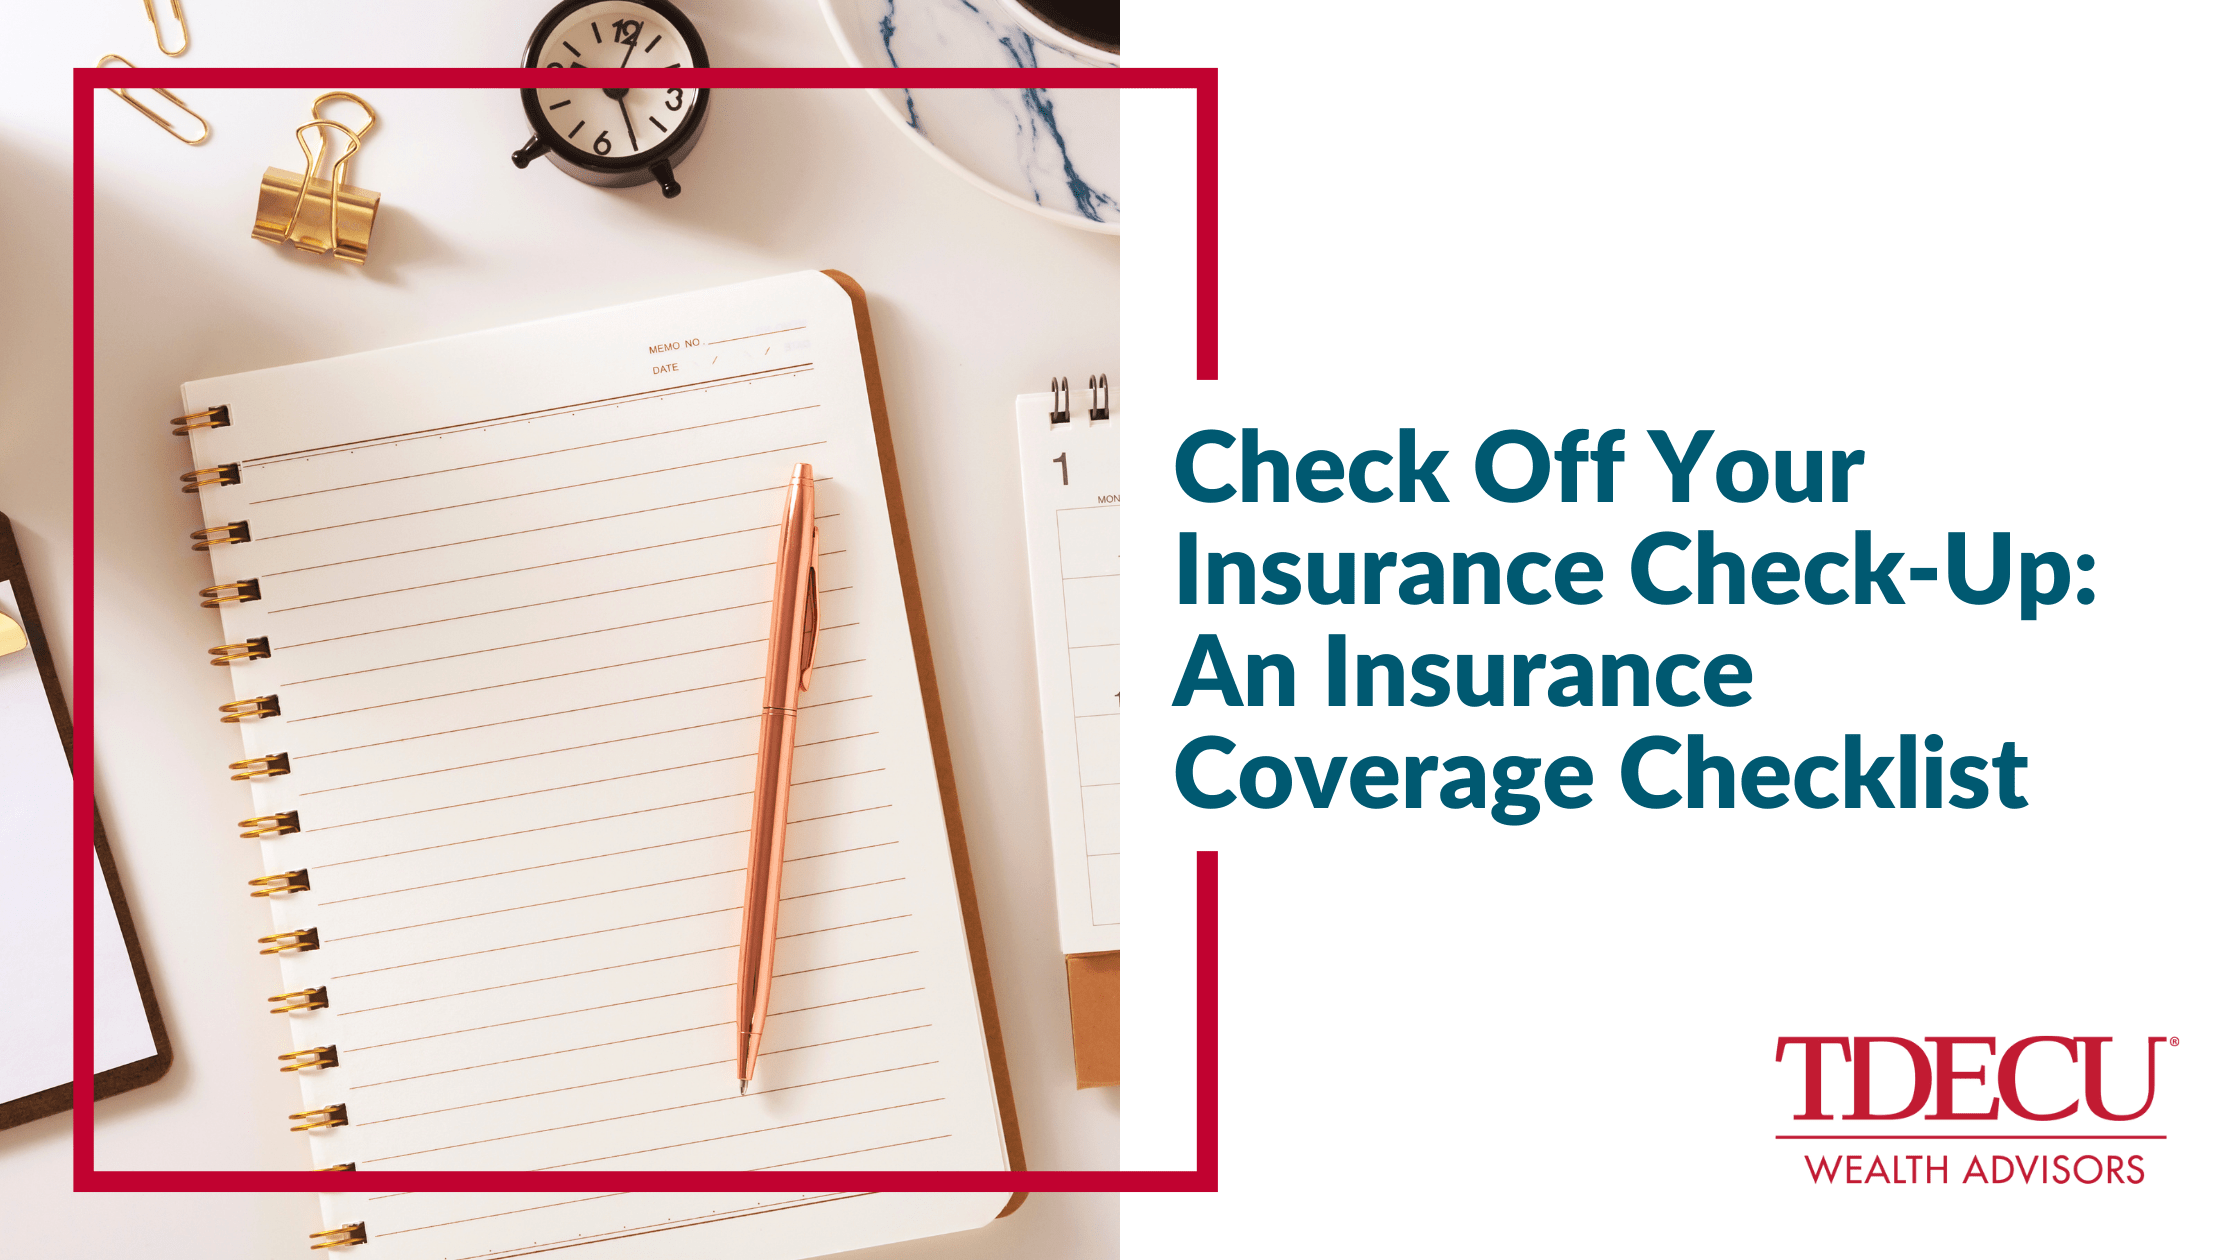 Check Off Your Insurance Check-Up: An Insurance Coverage Checklist